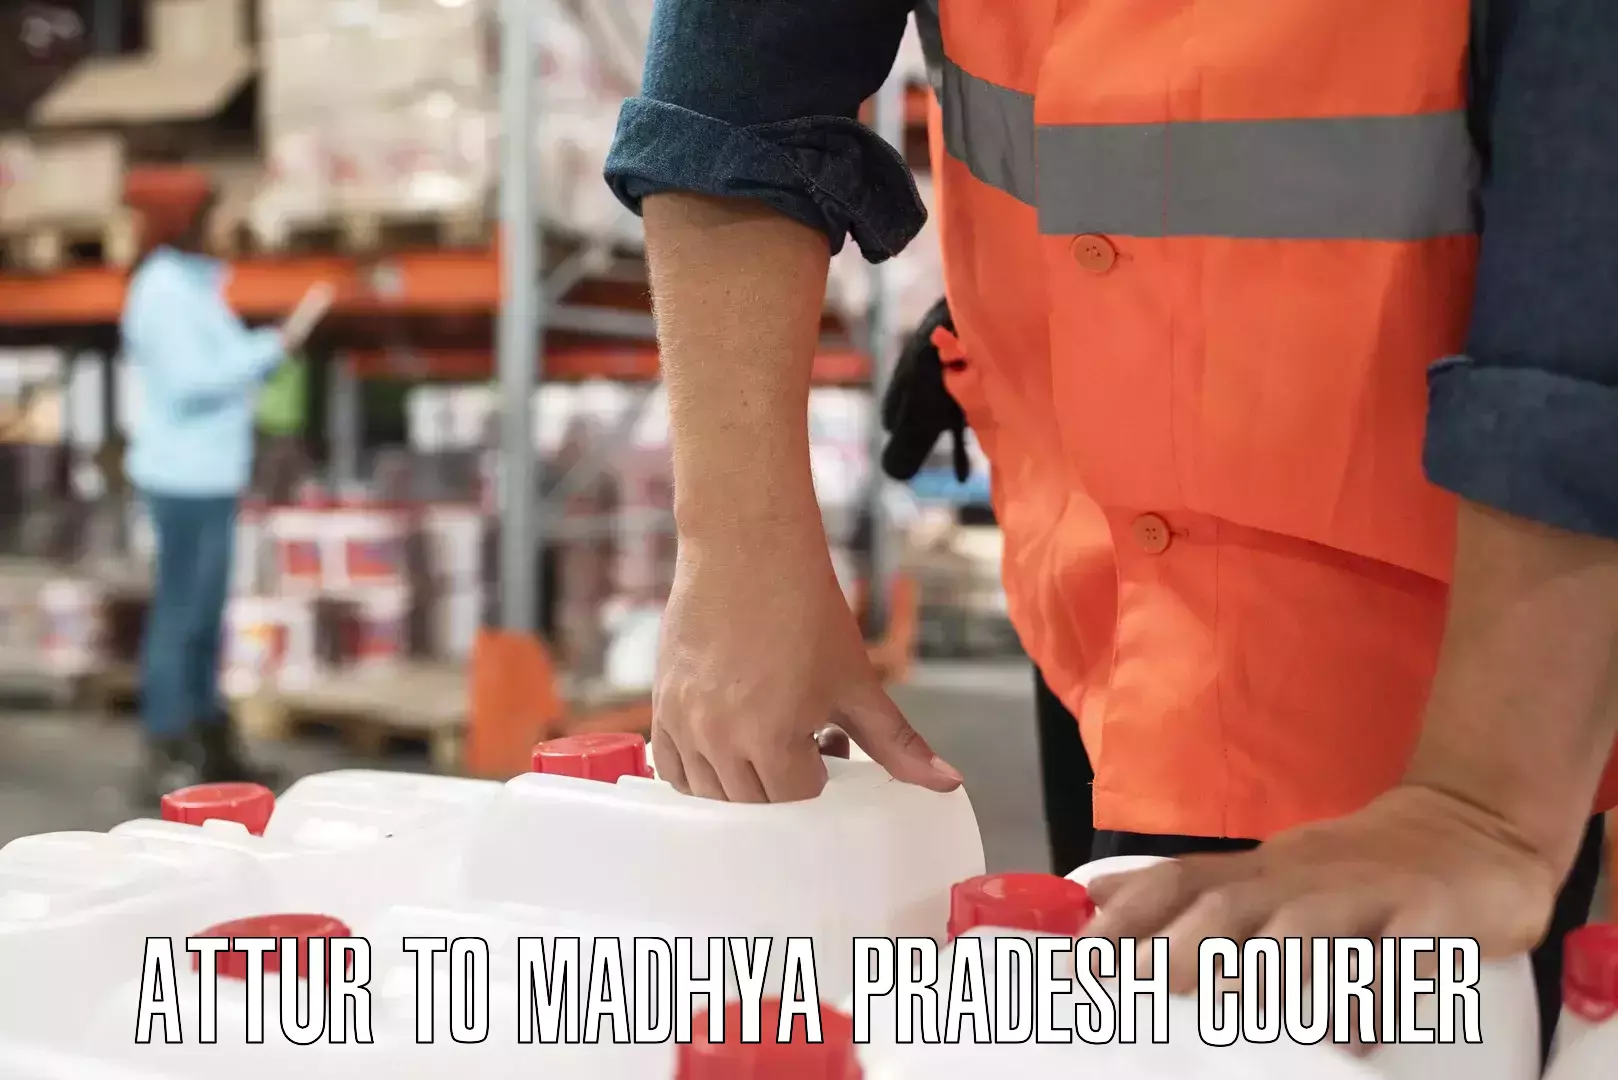 Professional courier services Attur to Sendhwa